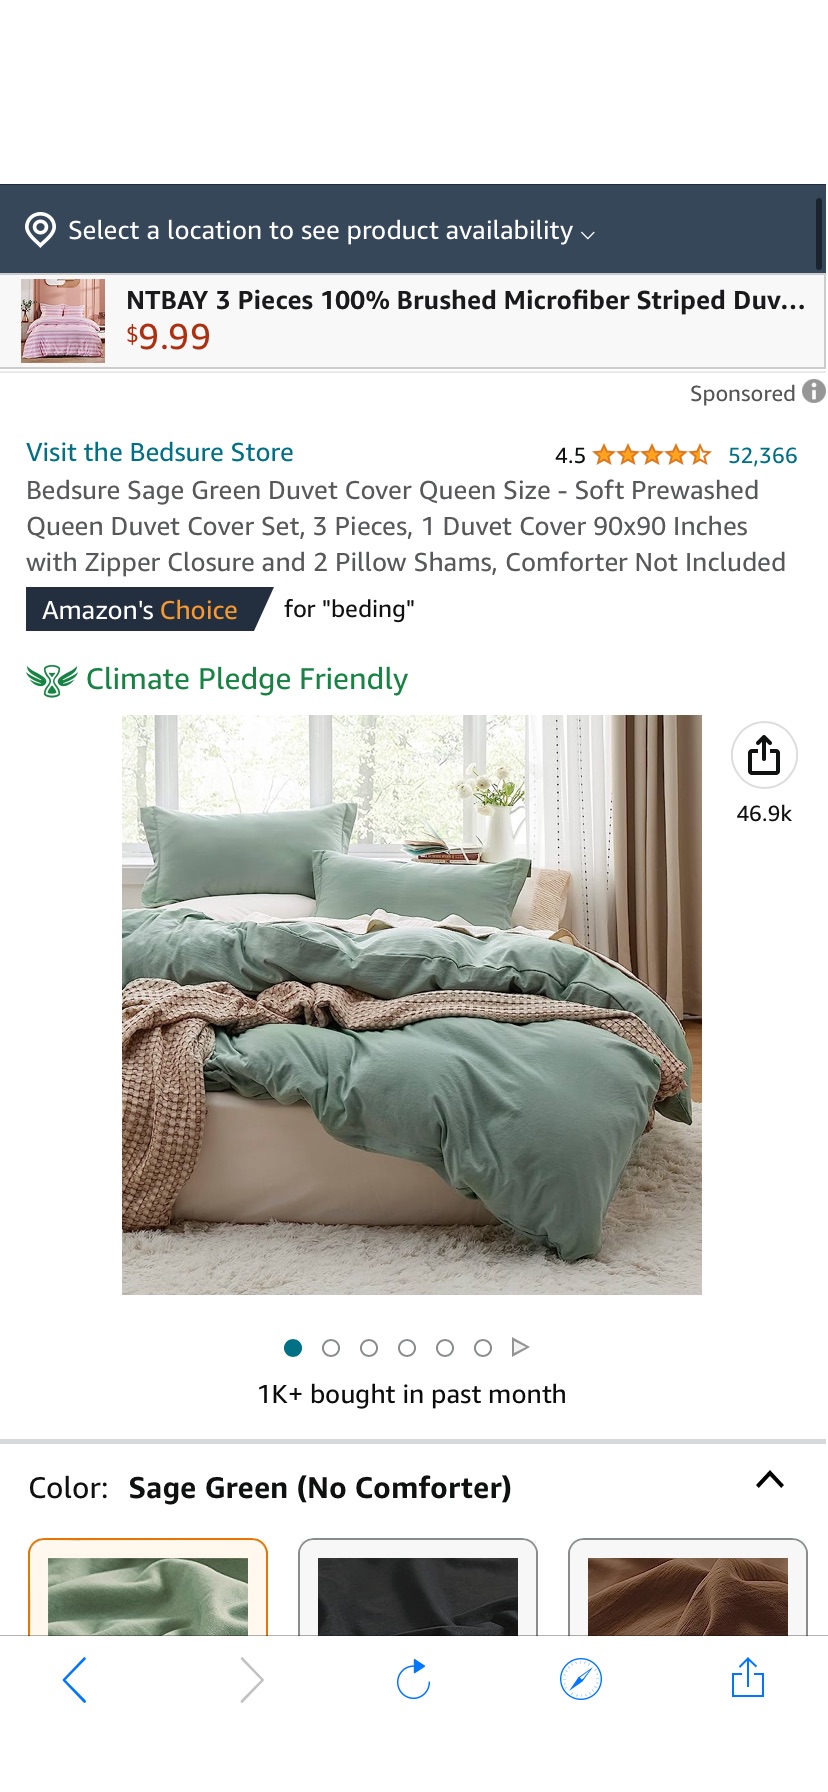 Amazon.com: Bedsure Sage Green 枕套被套Duvet Cover Queen Size - Soft Prewashed Queen Duvet Cover Set, 3 Pieces, 1 Duvet Cover 90x90 Inches with Zipper Closure and 2 Pillow Shams, Comforter Not Included : Home & Kitchen